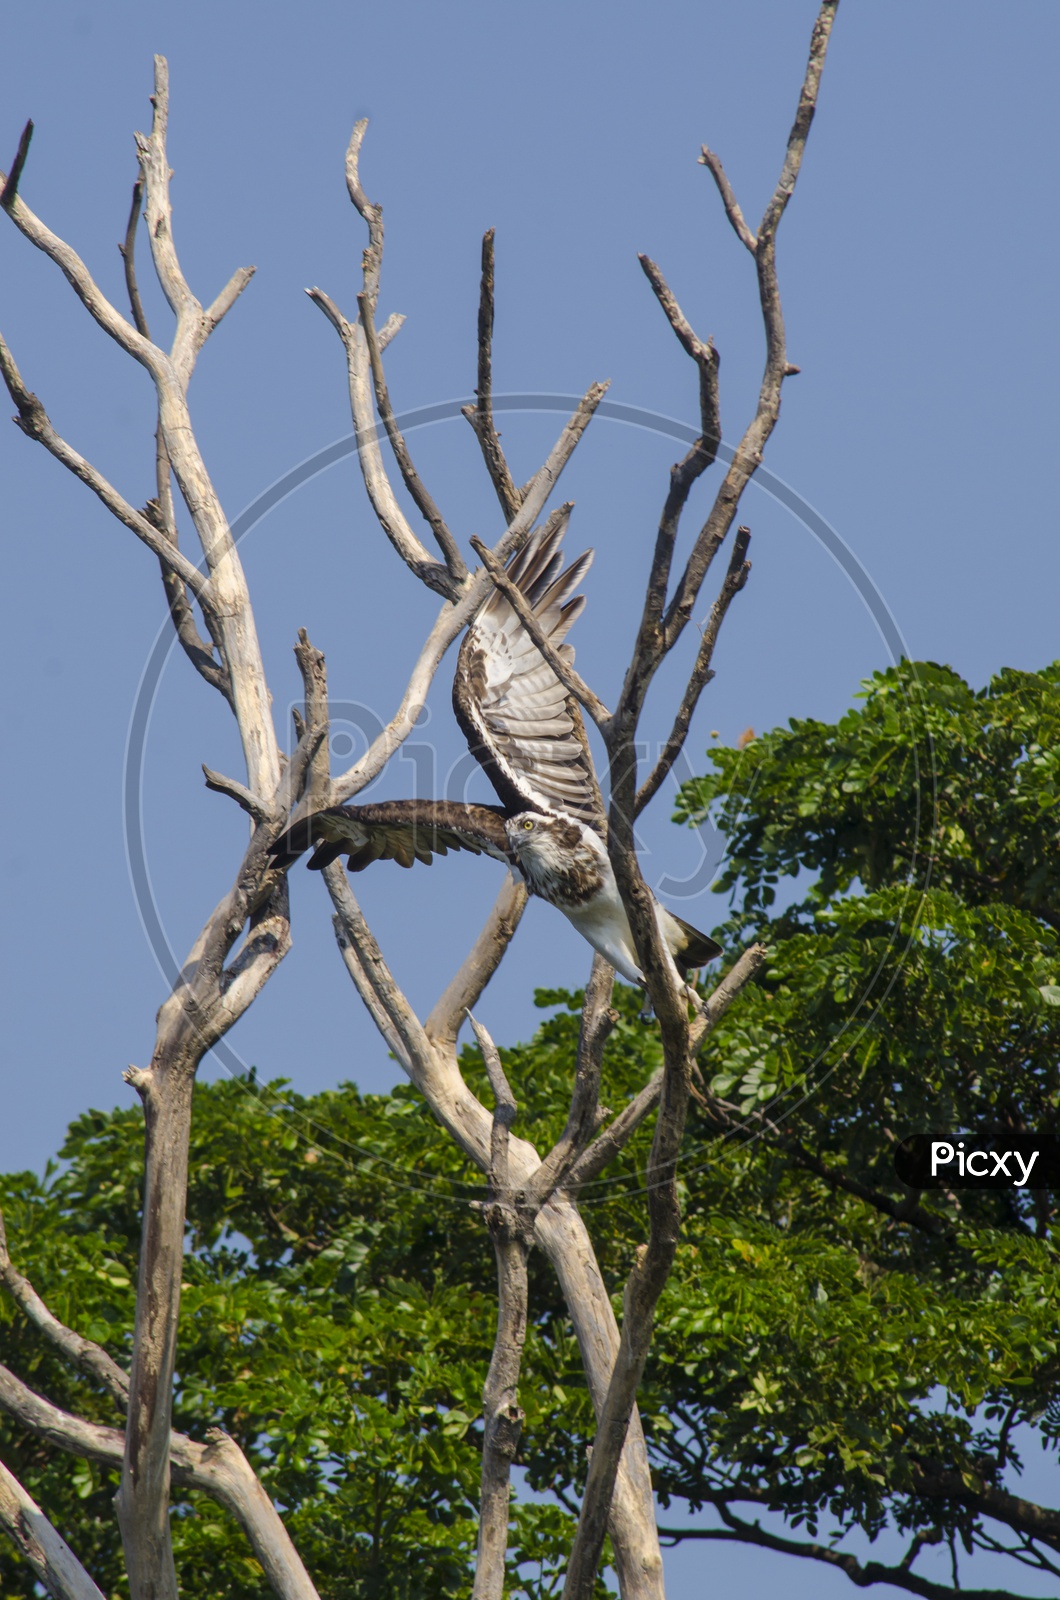 An Osprey taking off from a tree